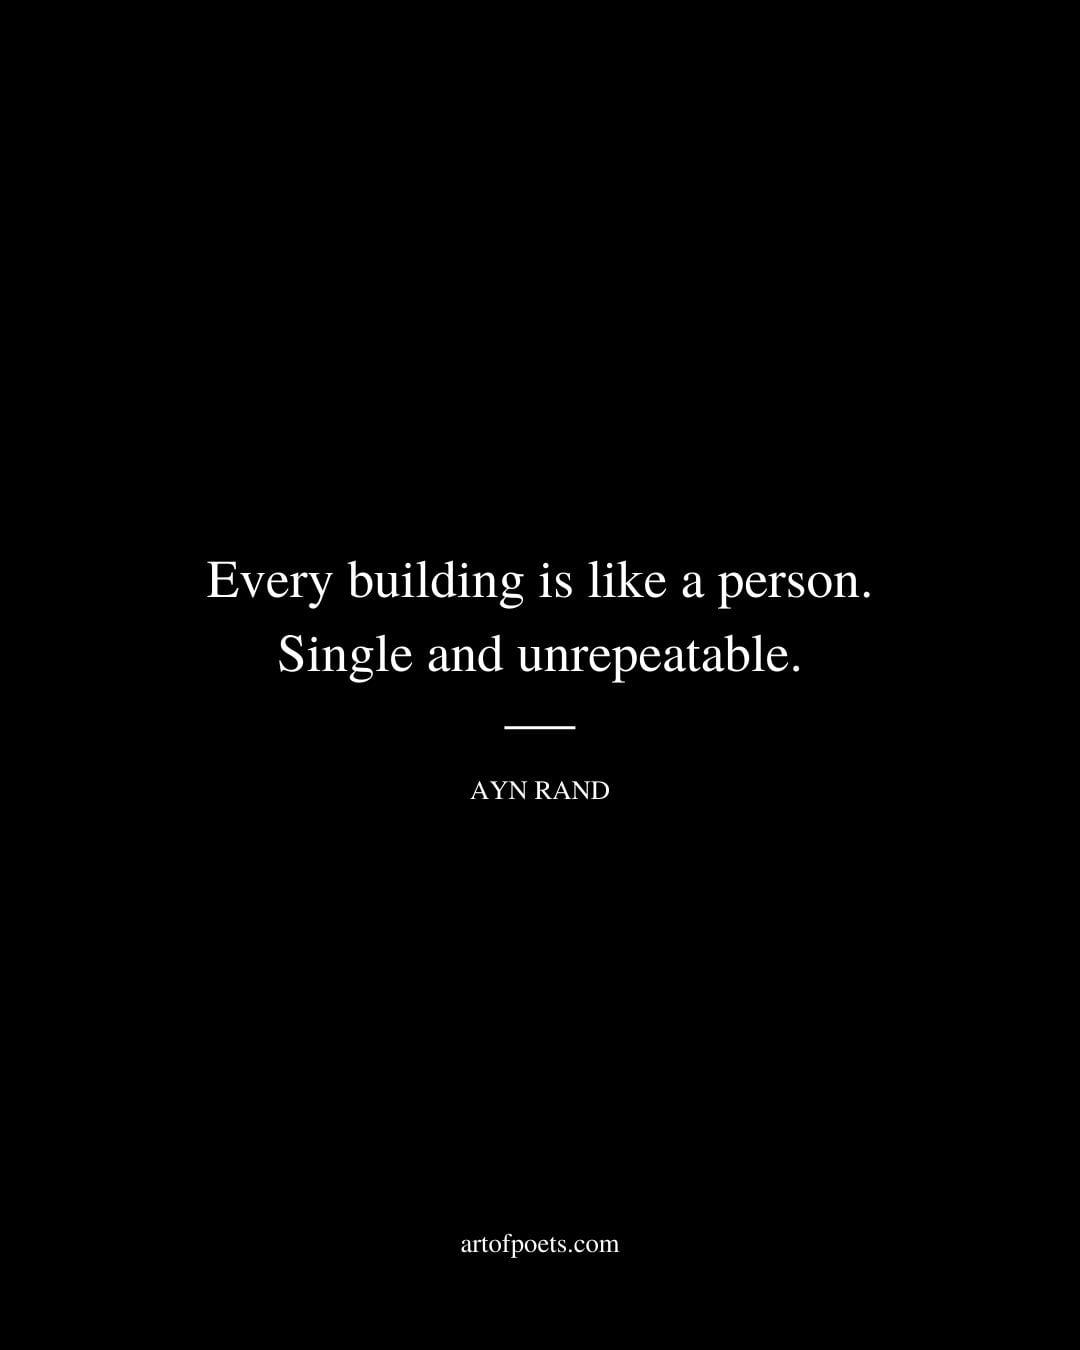 Every building is like a person. Single and unrepeatable